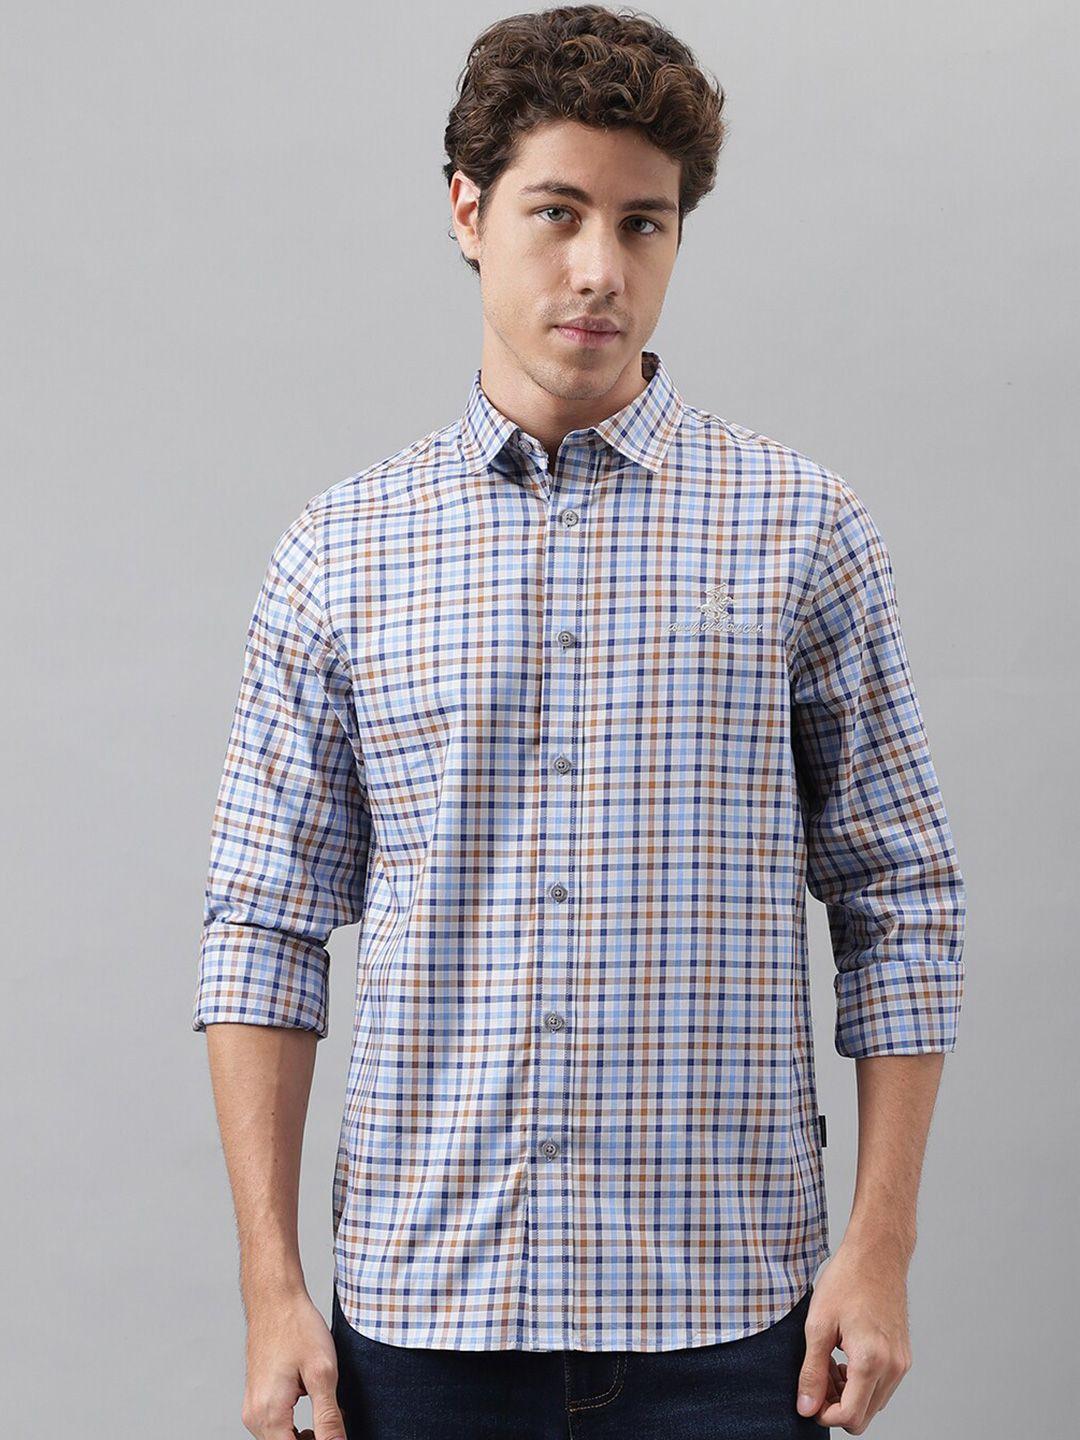 beverly hills polo club tailored fit oxford checked spread collar cotton casual shirt